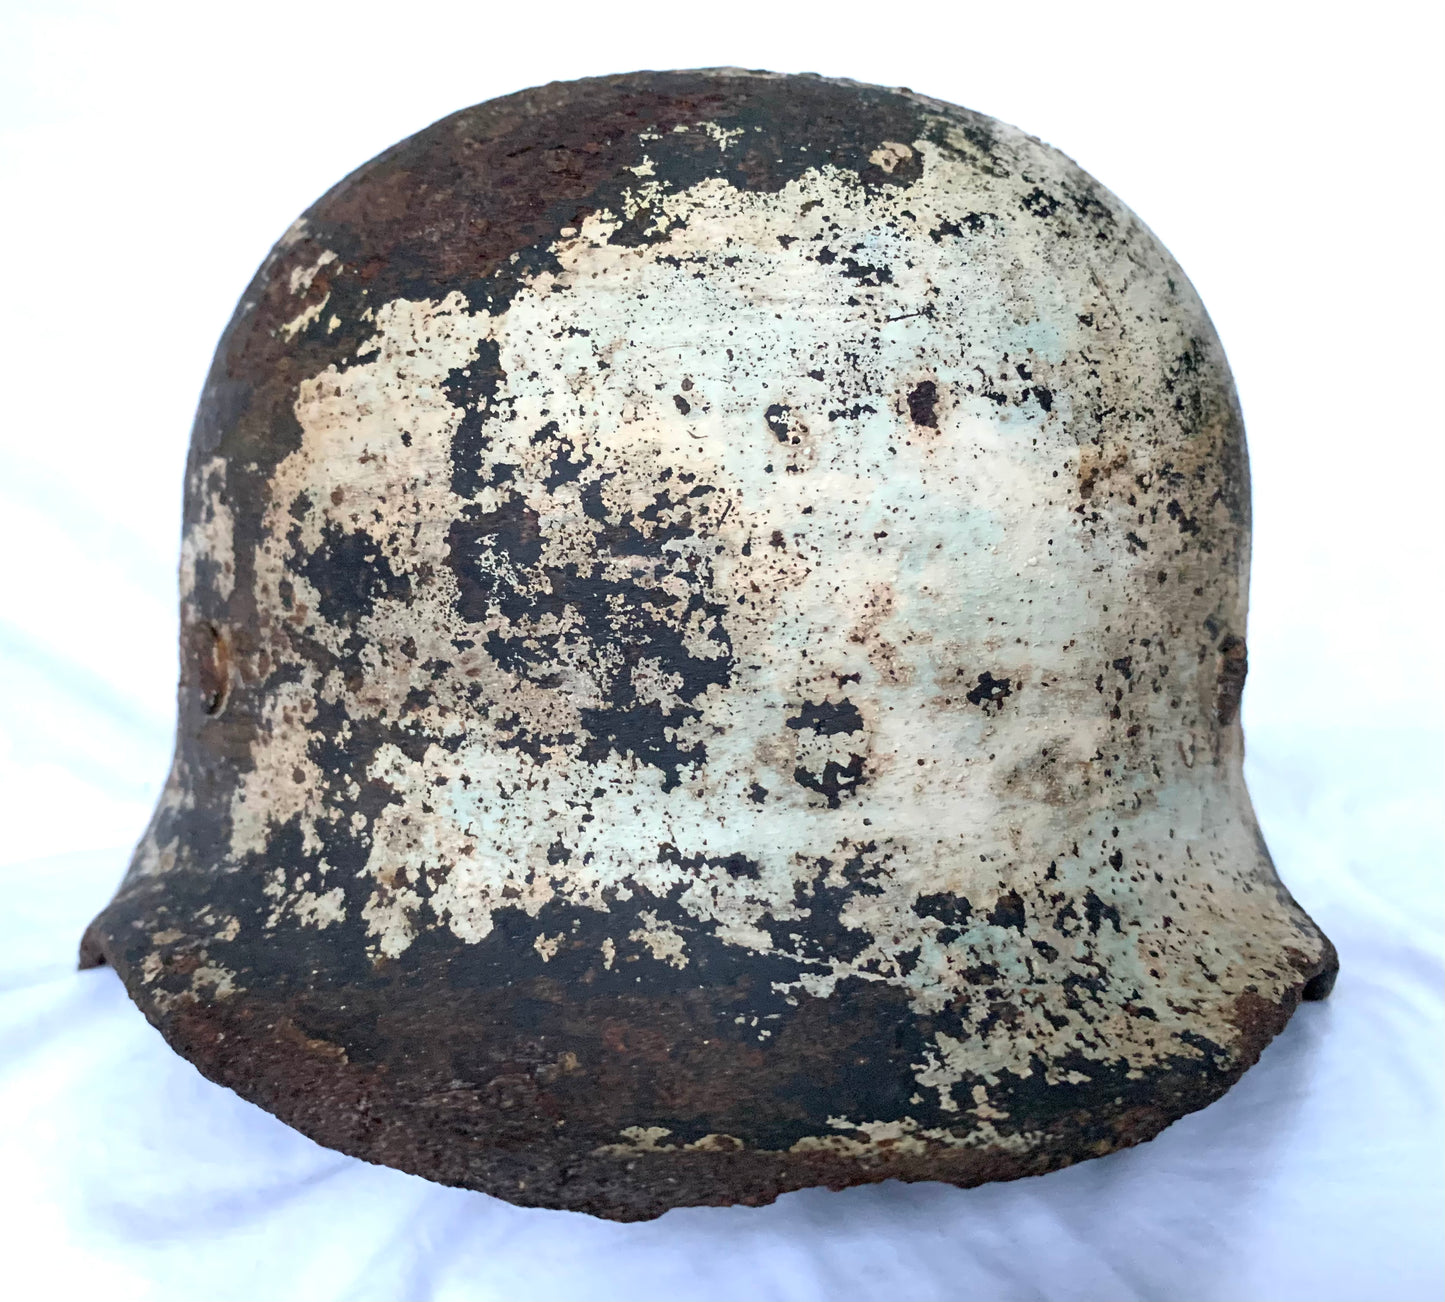 WW2 German M40 Single Decal Winter Camouflage Battle Recovered Helmet with Liner and maker mark.